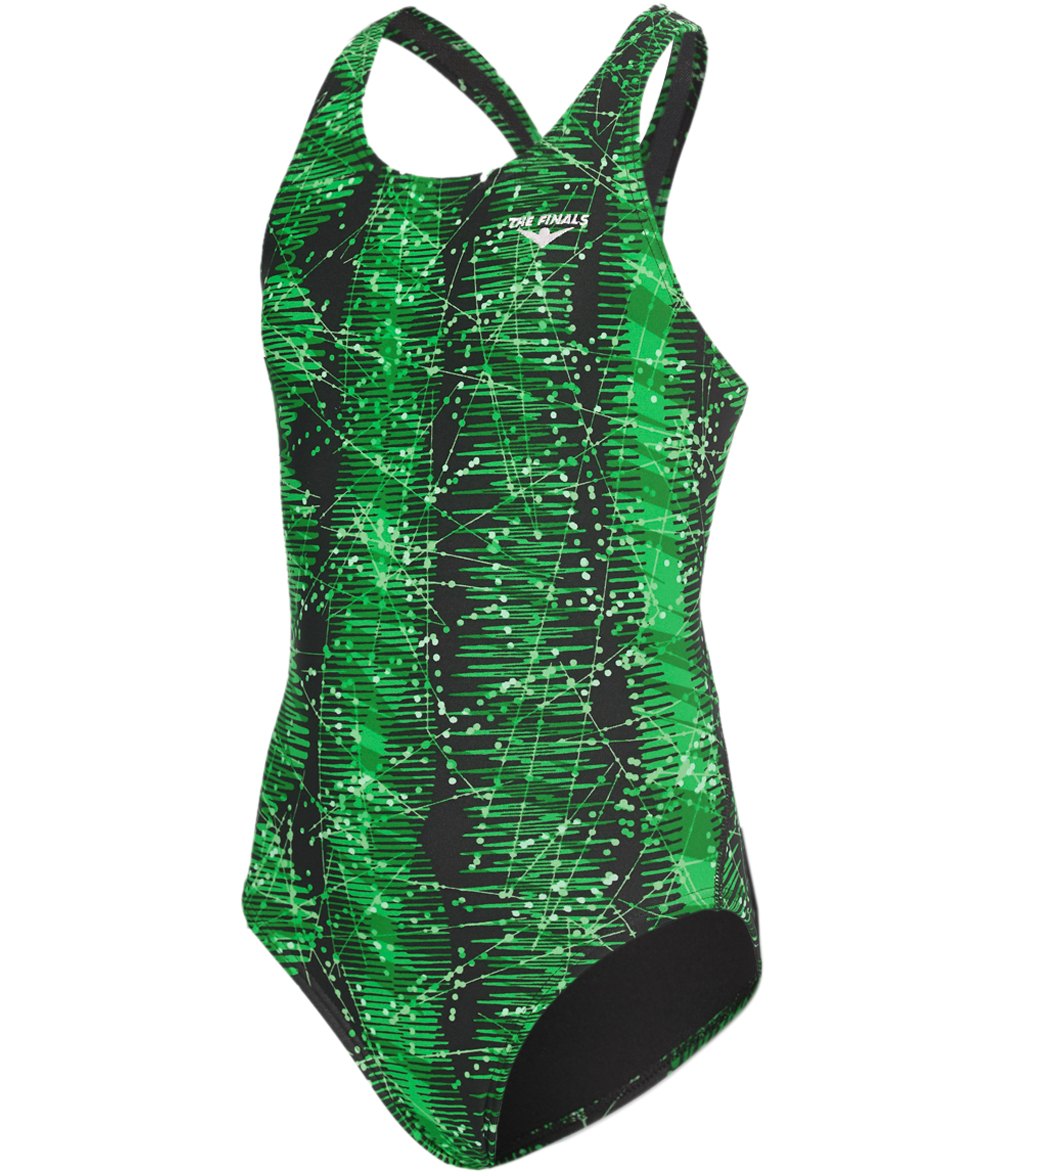 The Finals Girls Edge Wave Back One Piece Swimsuit